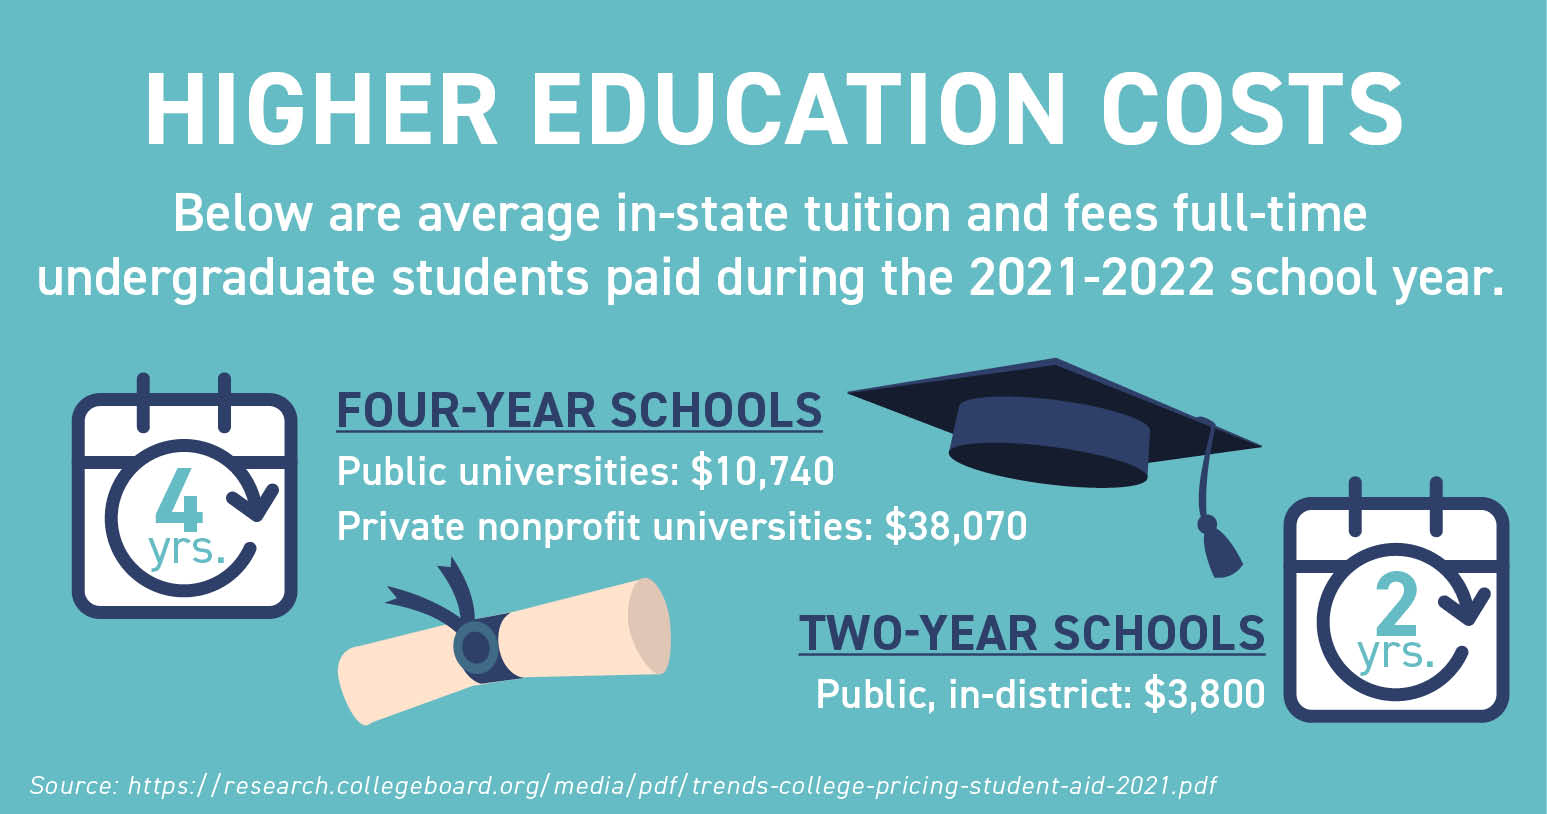 Higher Education Costs